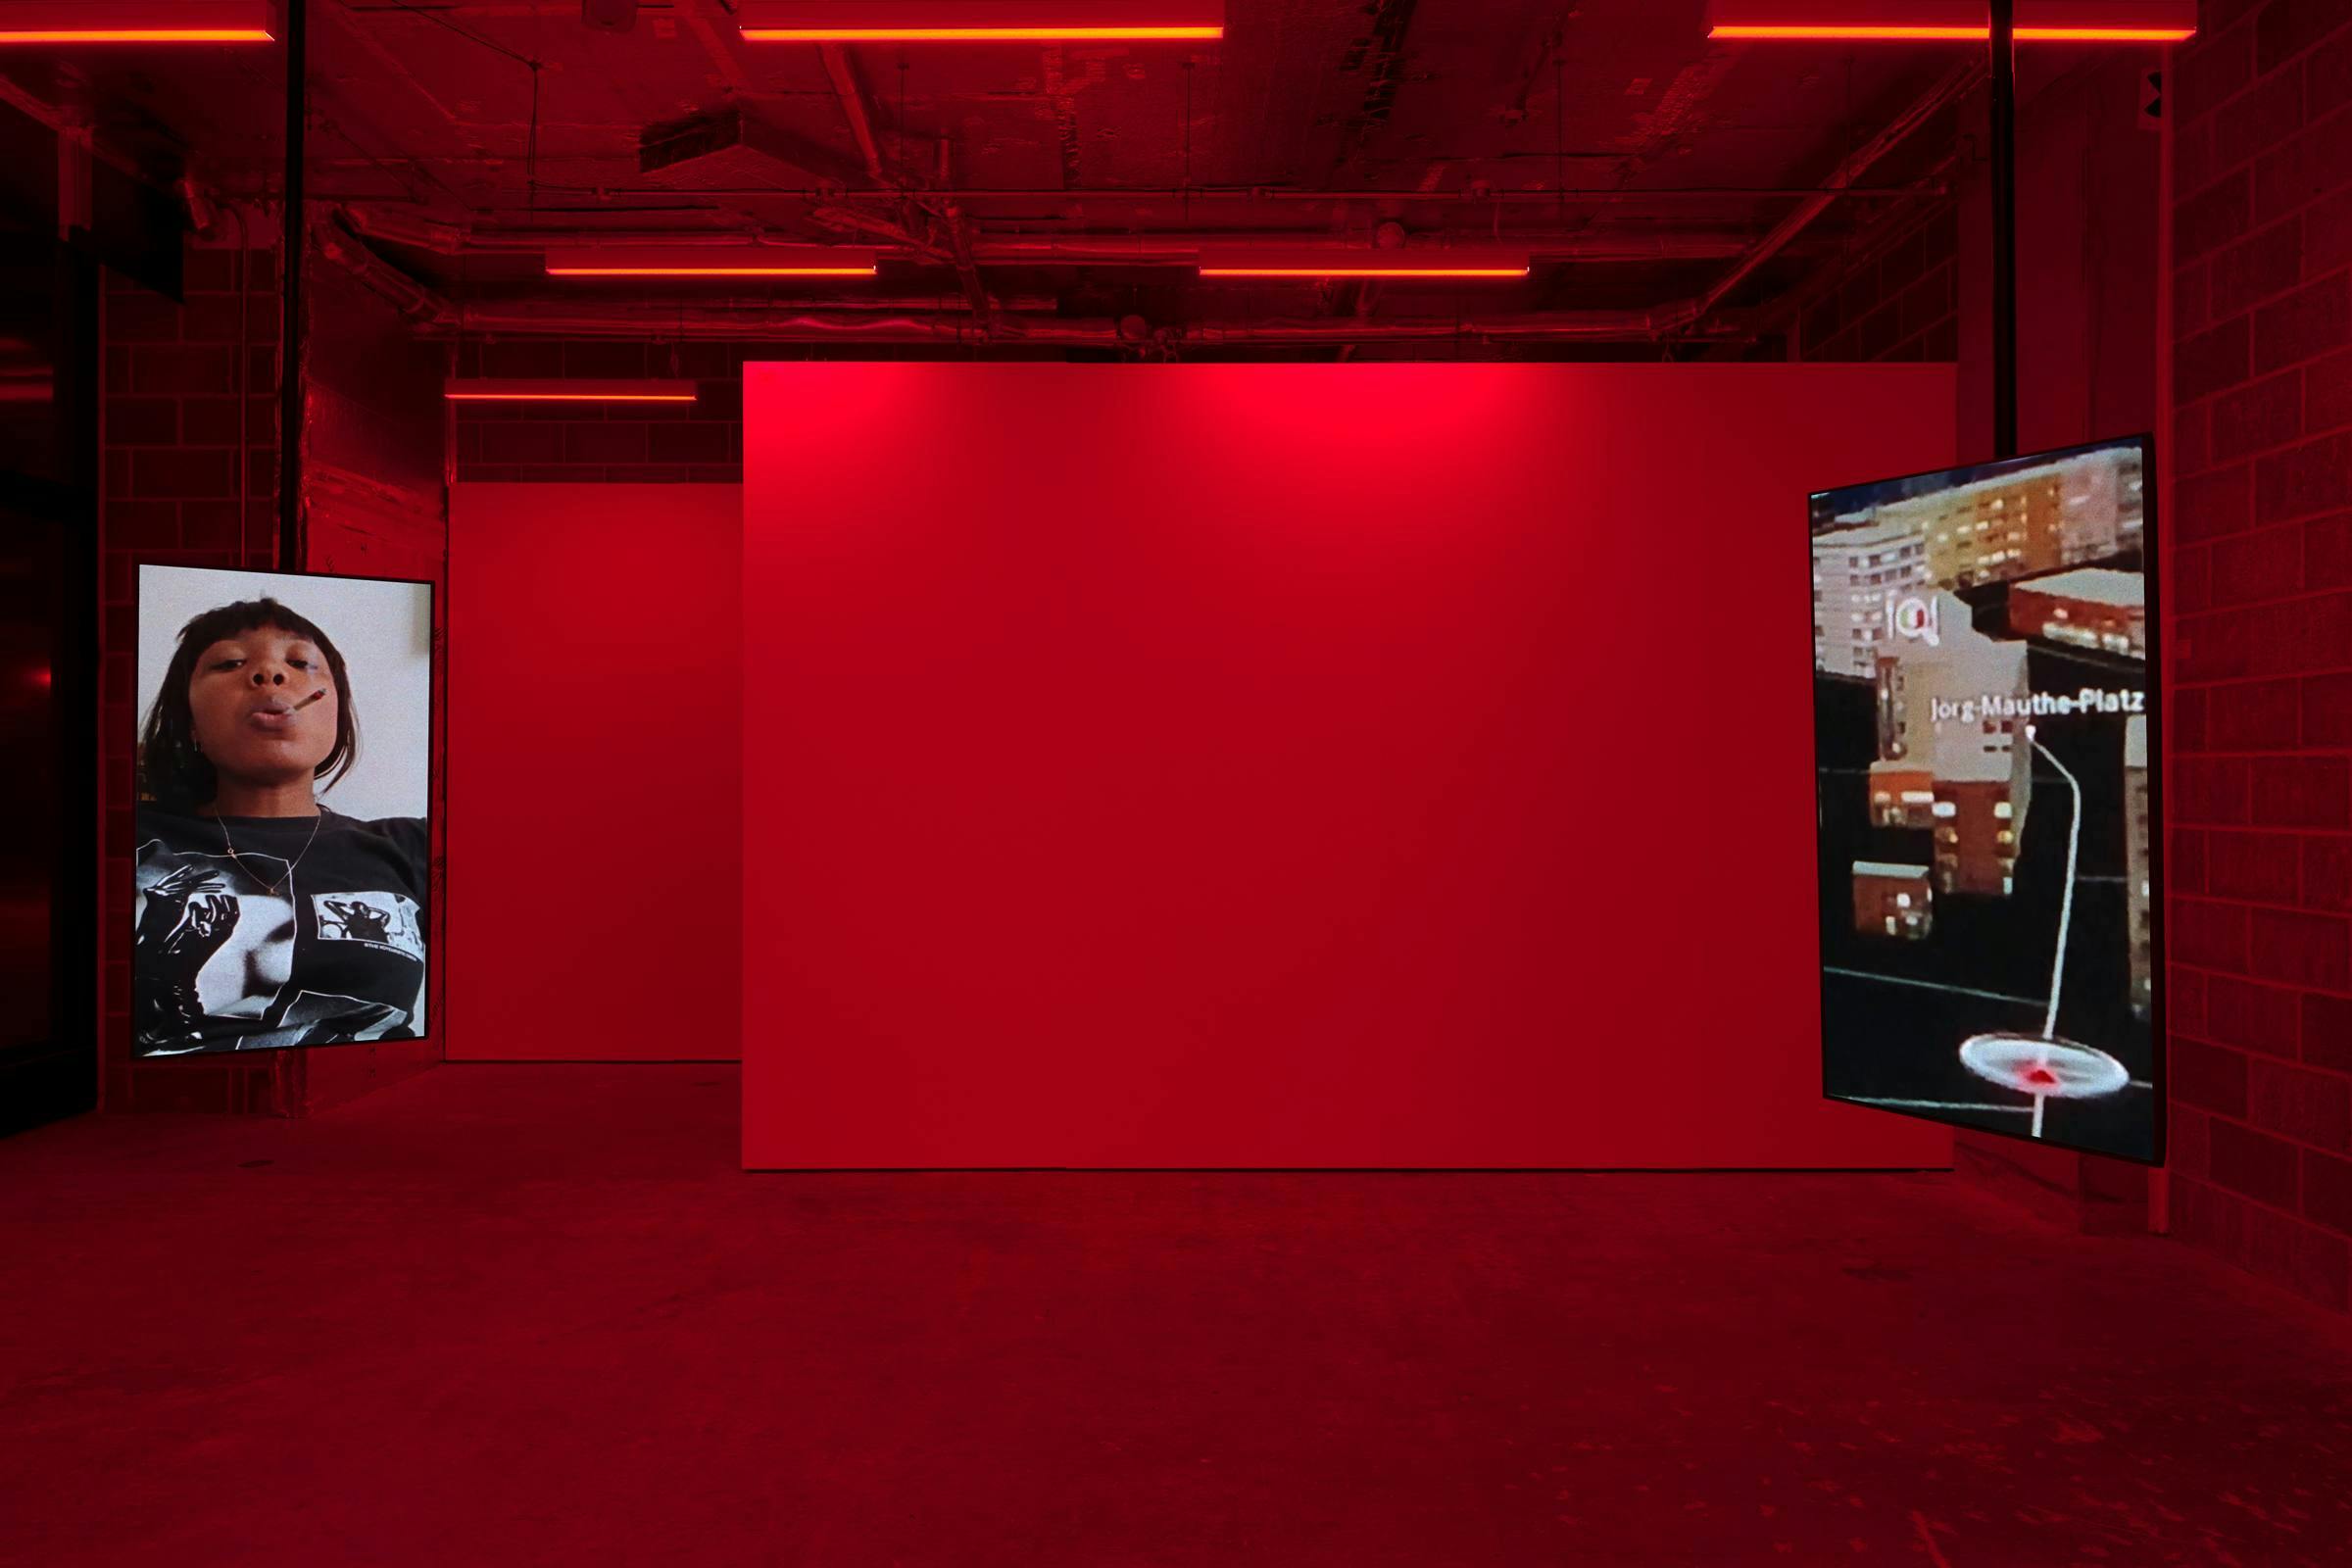 A image of art works in a gallery space. The space is lit red and there are 2 vertical monitors on view that are suspended from the ceiling